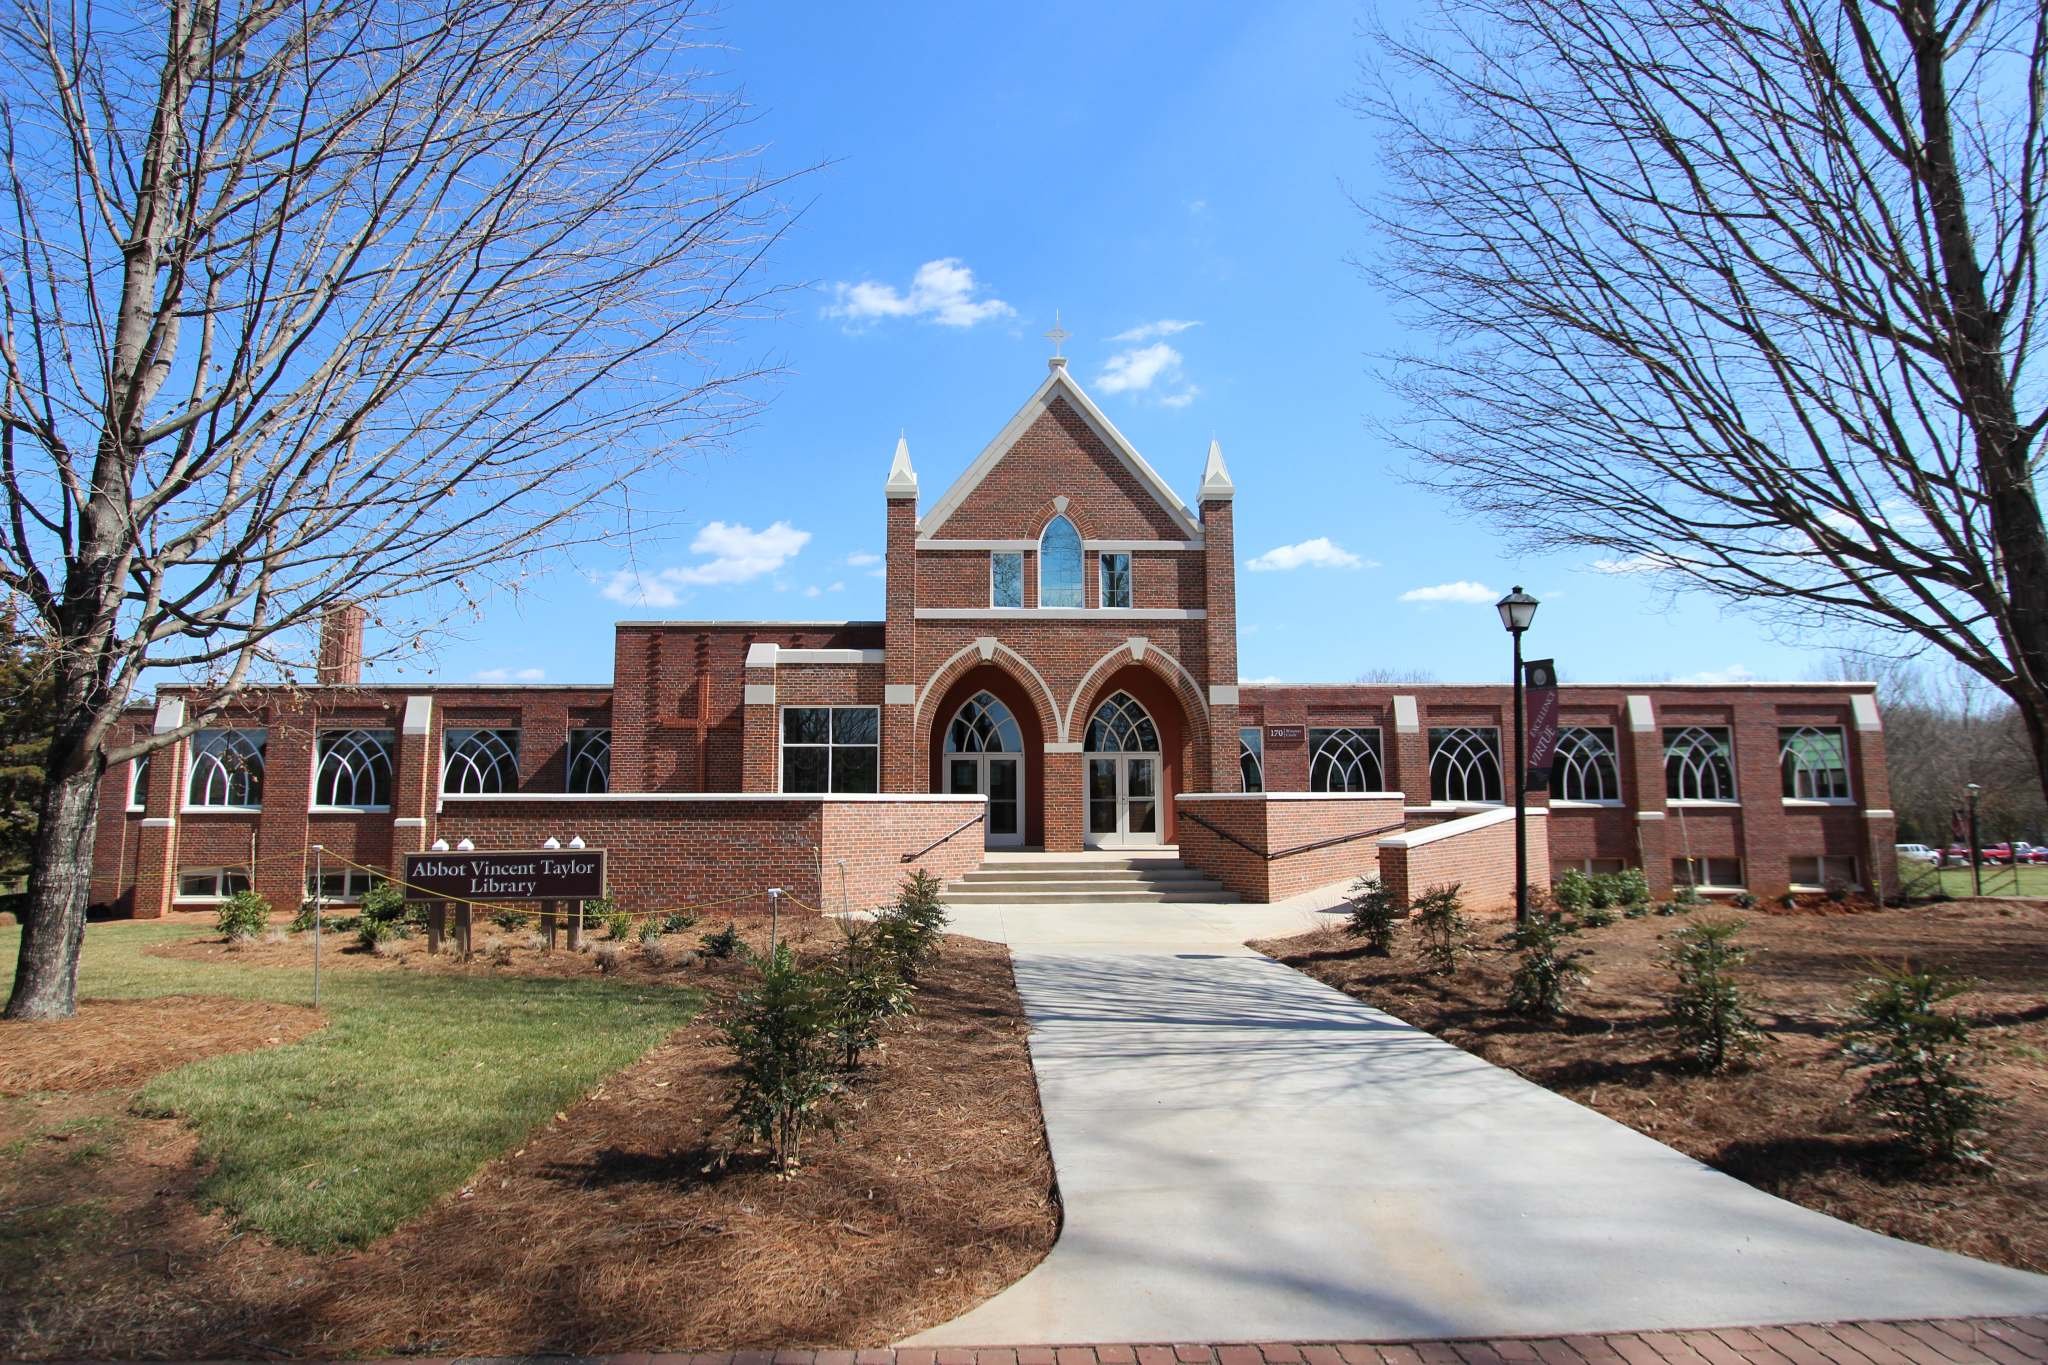 Entrance of the Abbot Vincent Taylor Library following renovations in 2015.